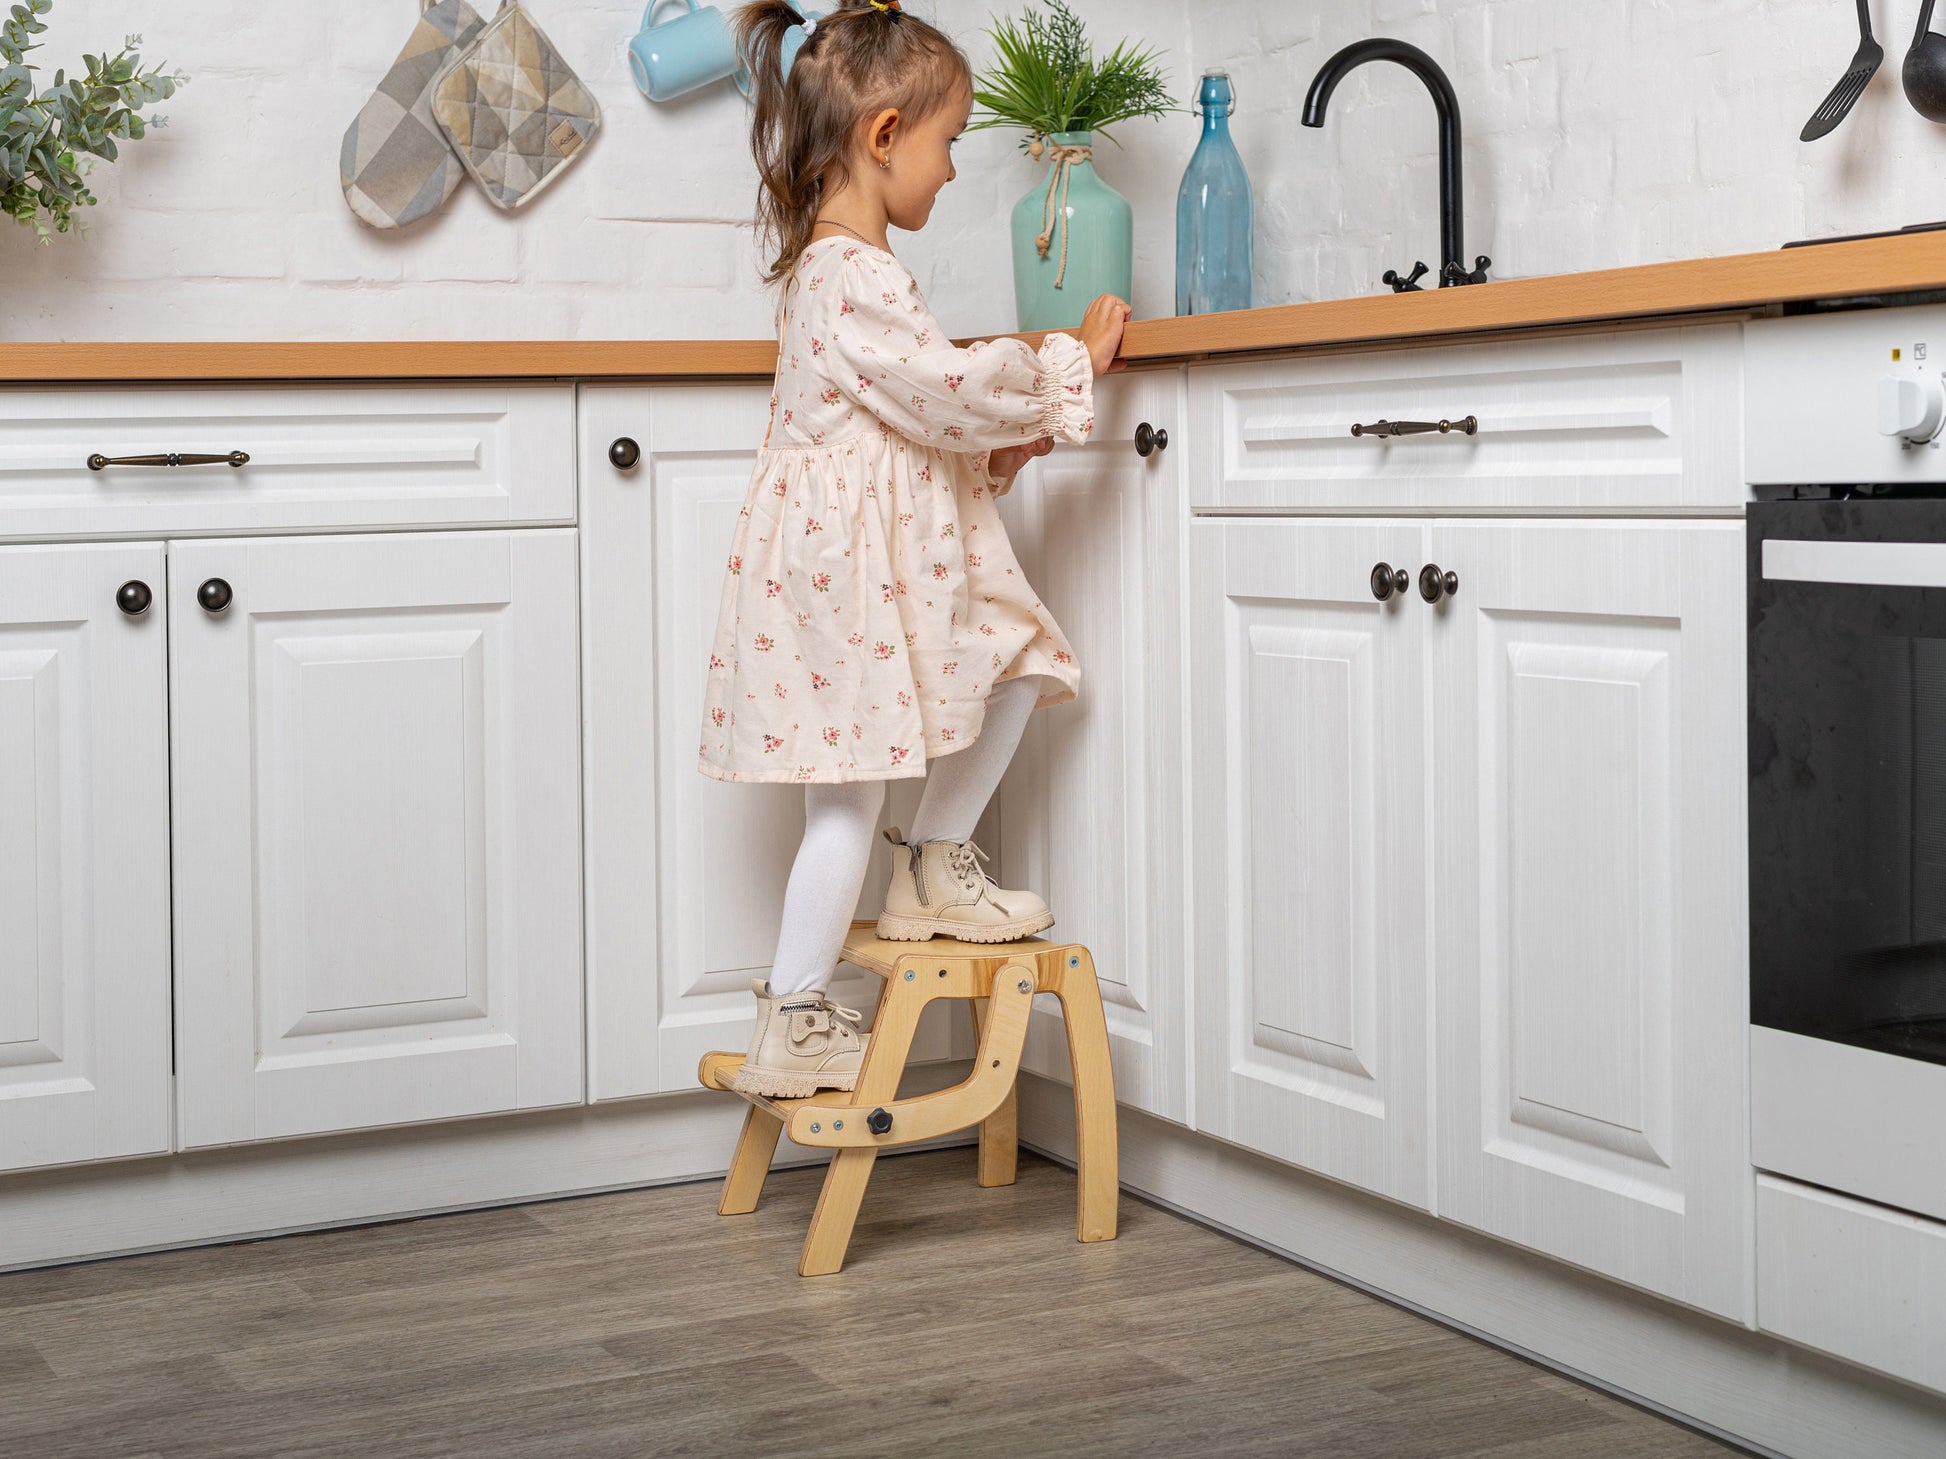 Step stool & chair 2in1, toddler step stool